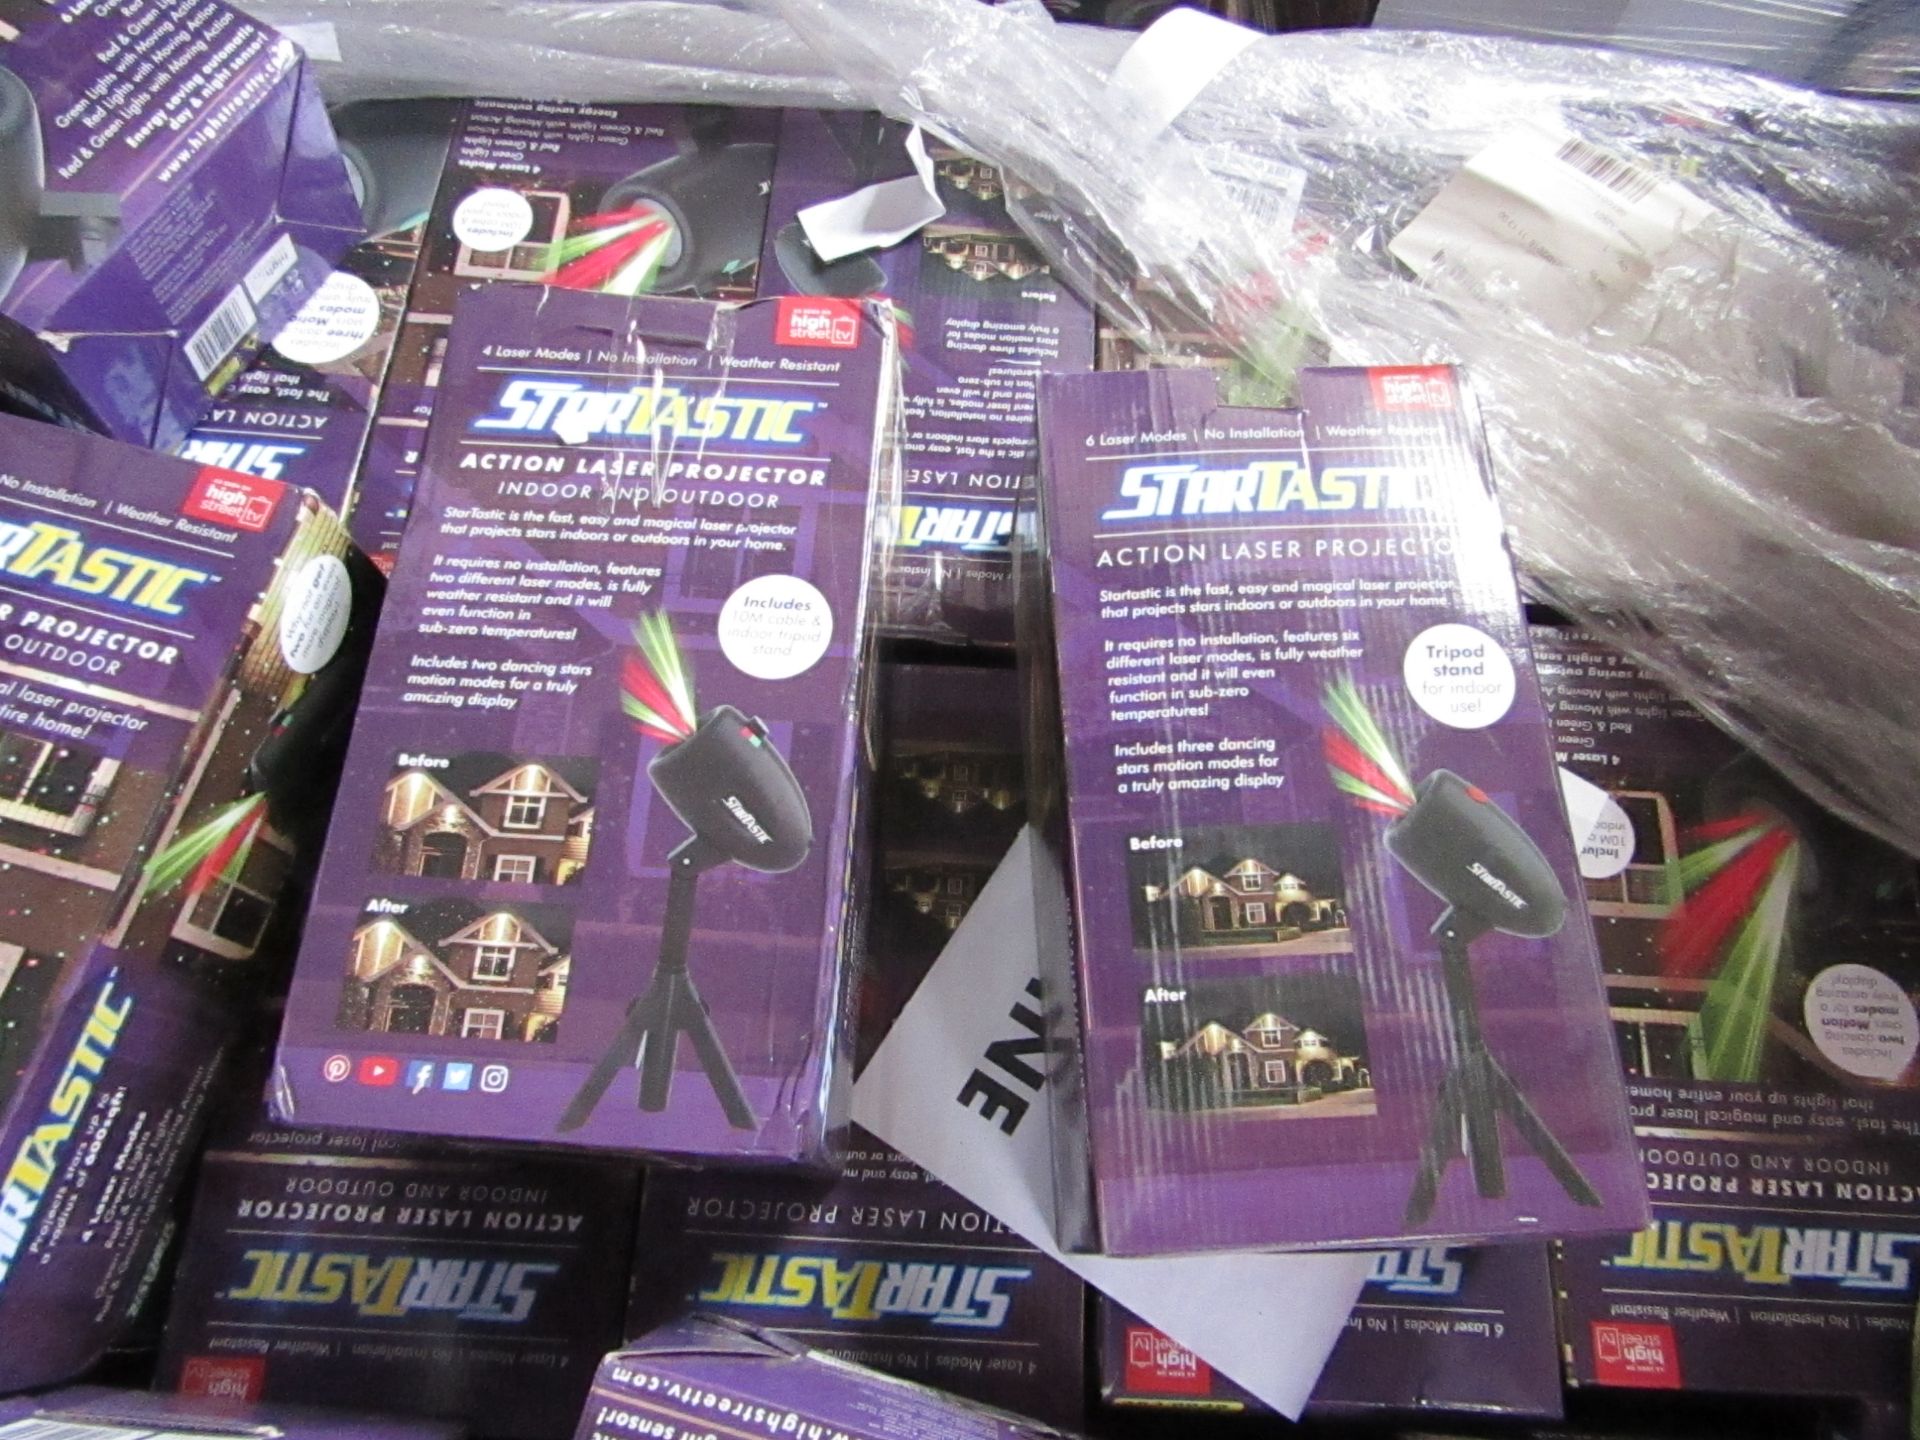 | 5X | STARTASTIC ACTION LASER PROJECTORS | UNCHECKED AND BOXED | NO ONLINE RE-SALE | SKU